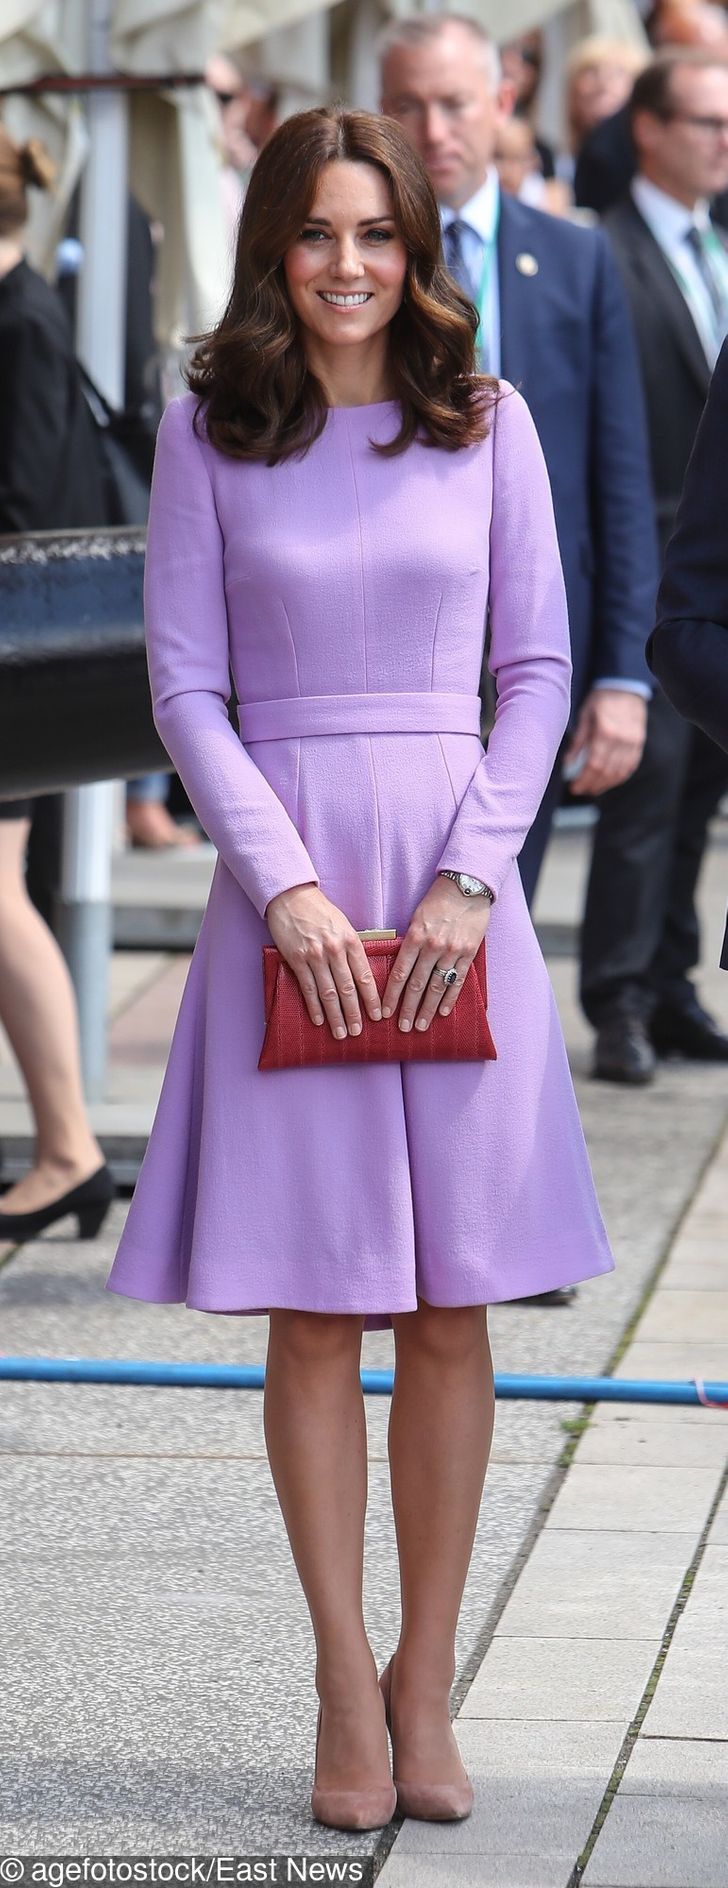 15 Outfits That the Royals Loved So Much, They Donned Them More Than Once